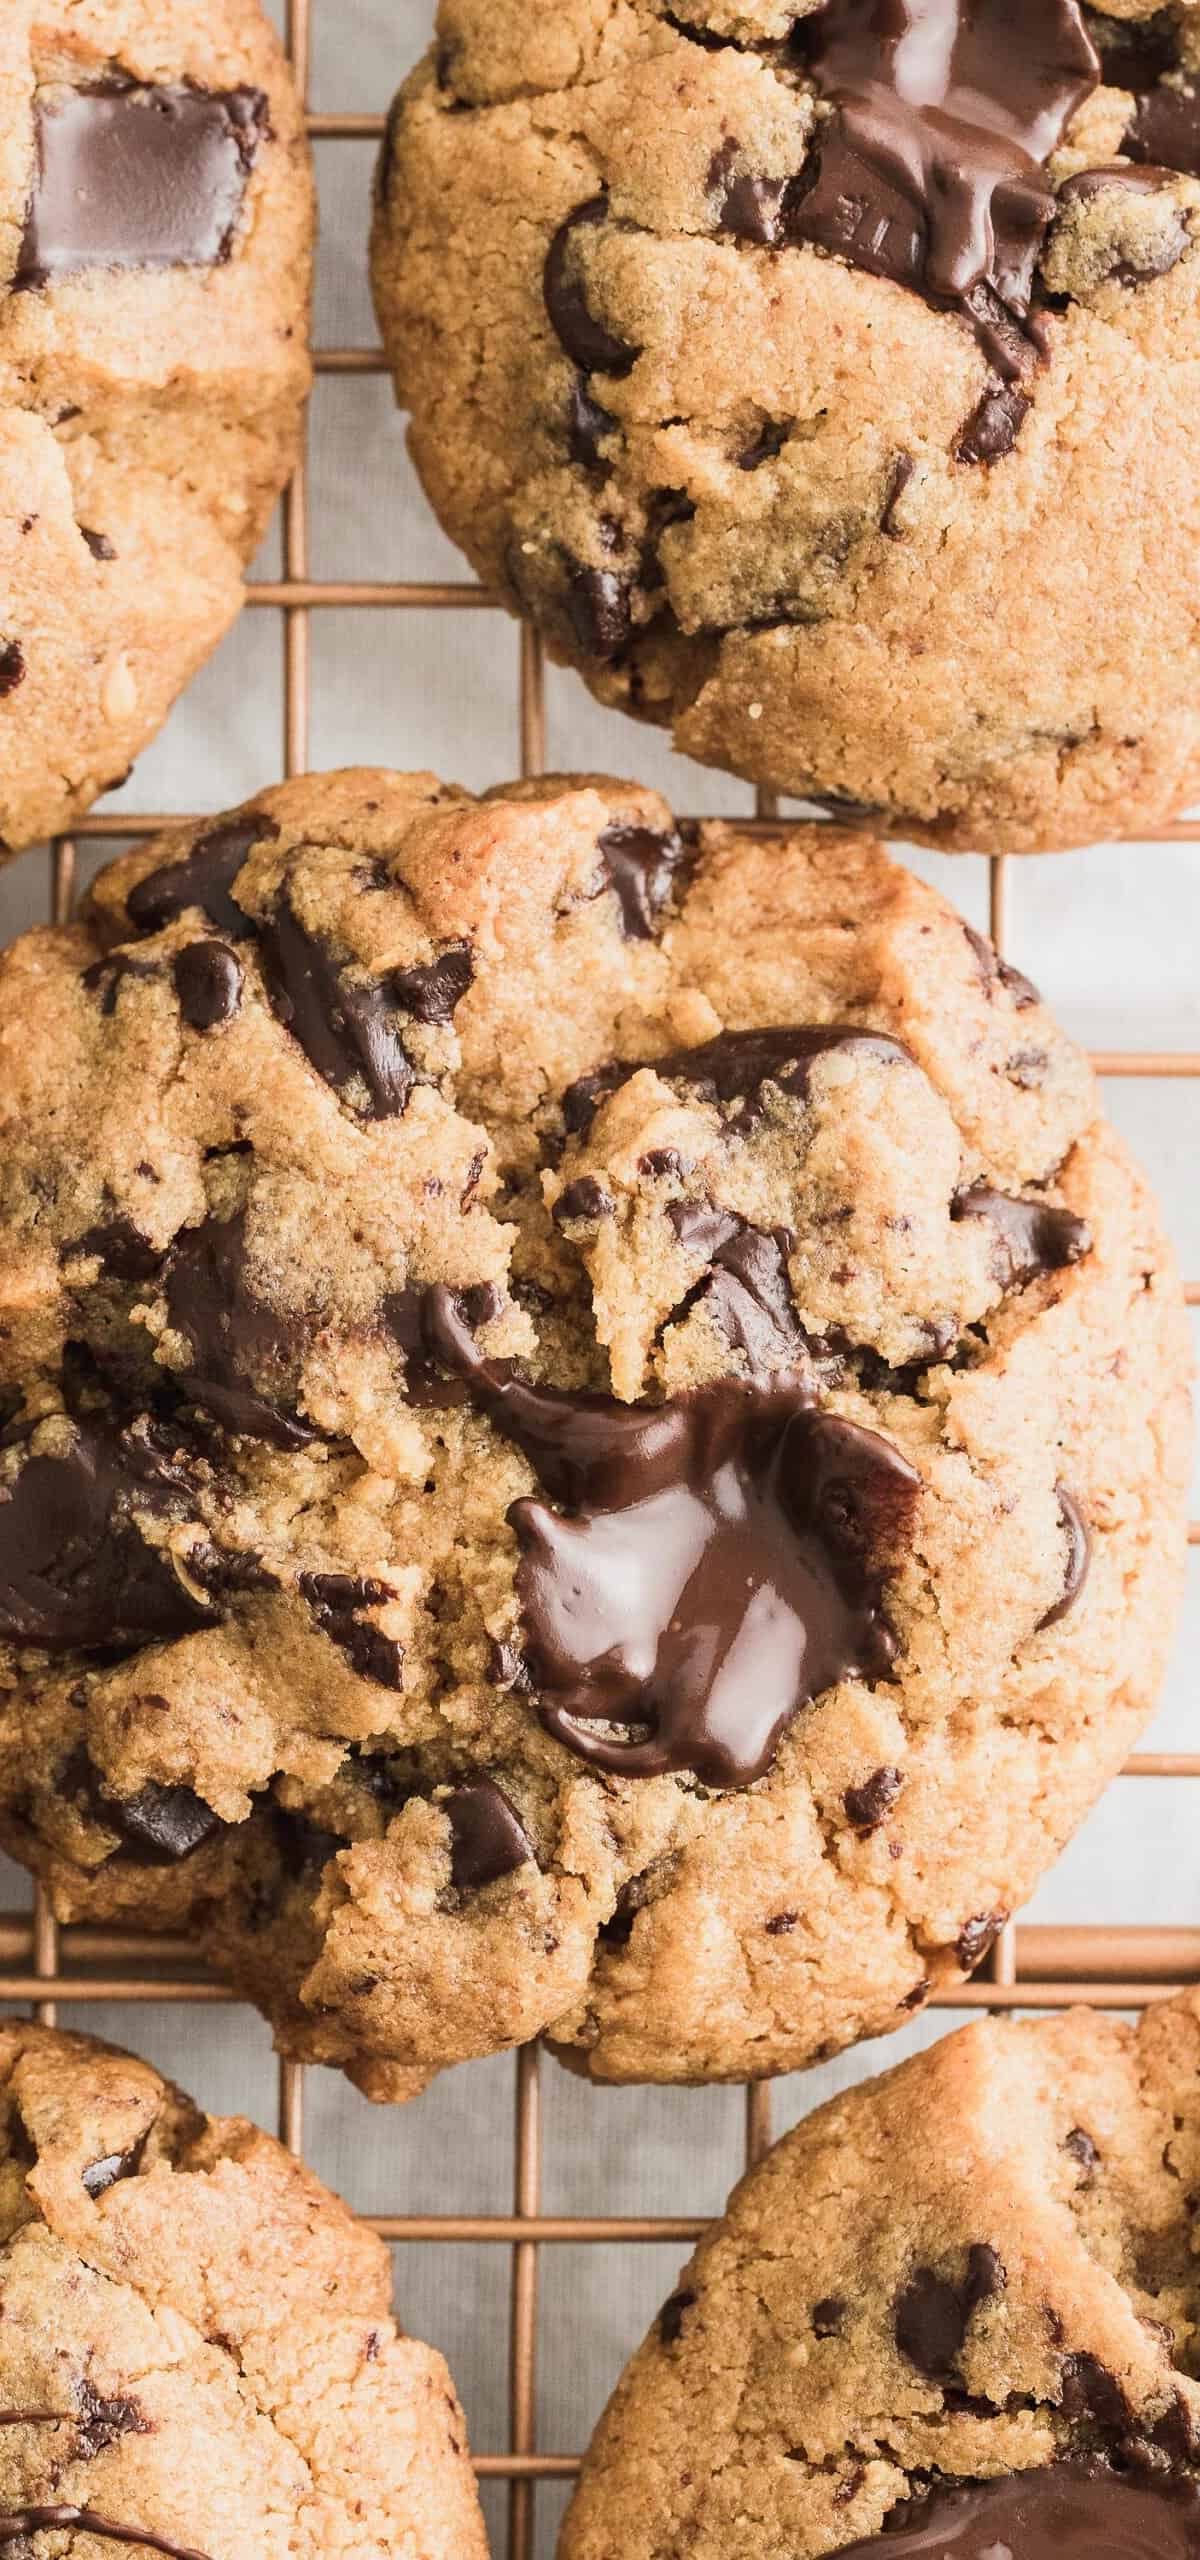  These cookies will have you reaching for a glass of milk.